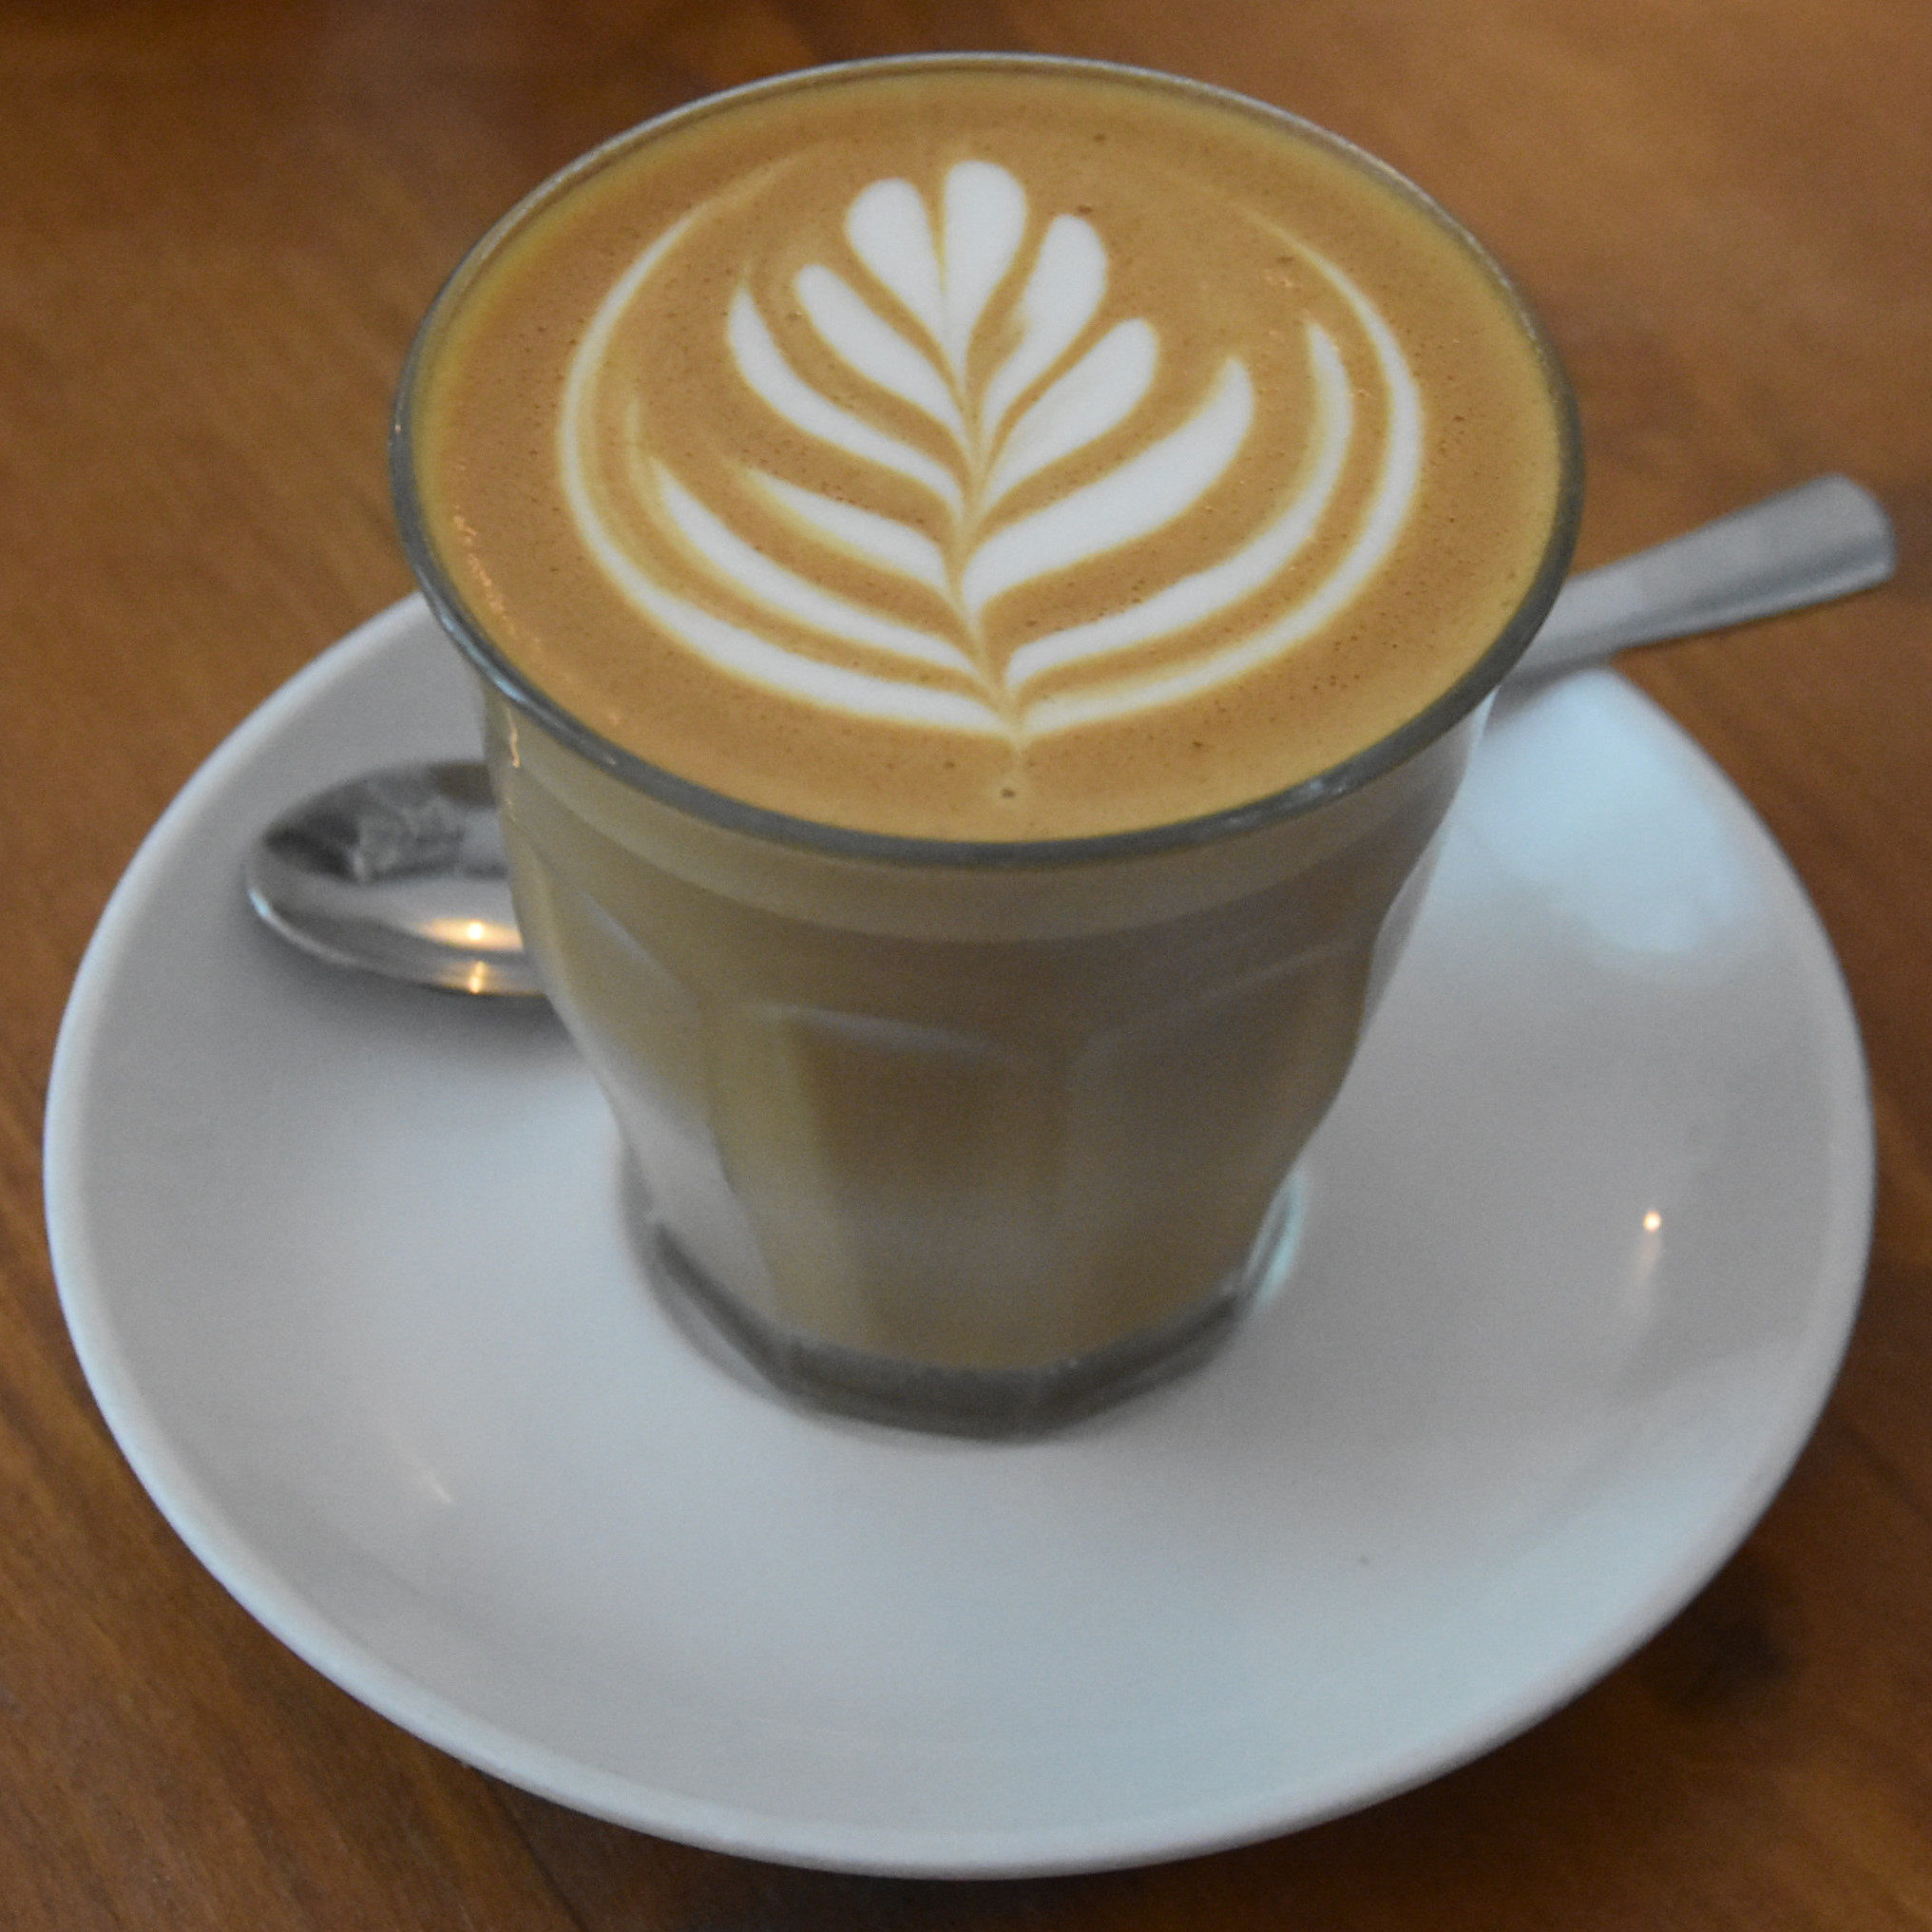 A lovely flat white, made with The Coffee Gang's bespoke house blend, and served in a glass at the original coffee shop on Hohenstaufenring.